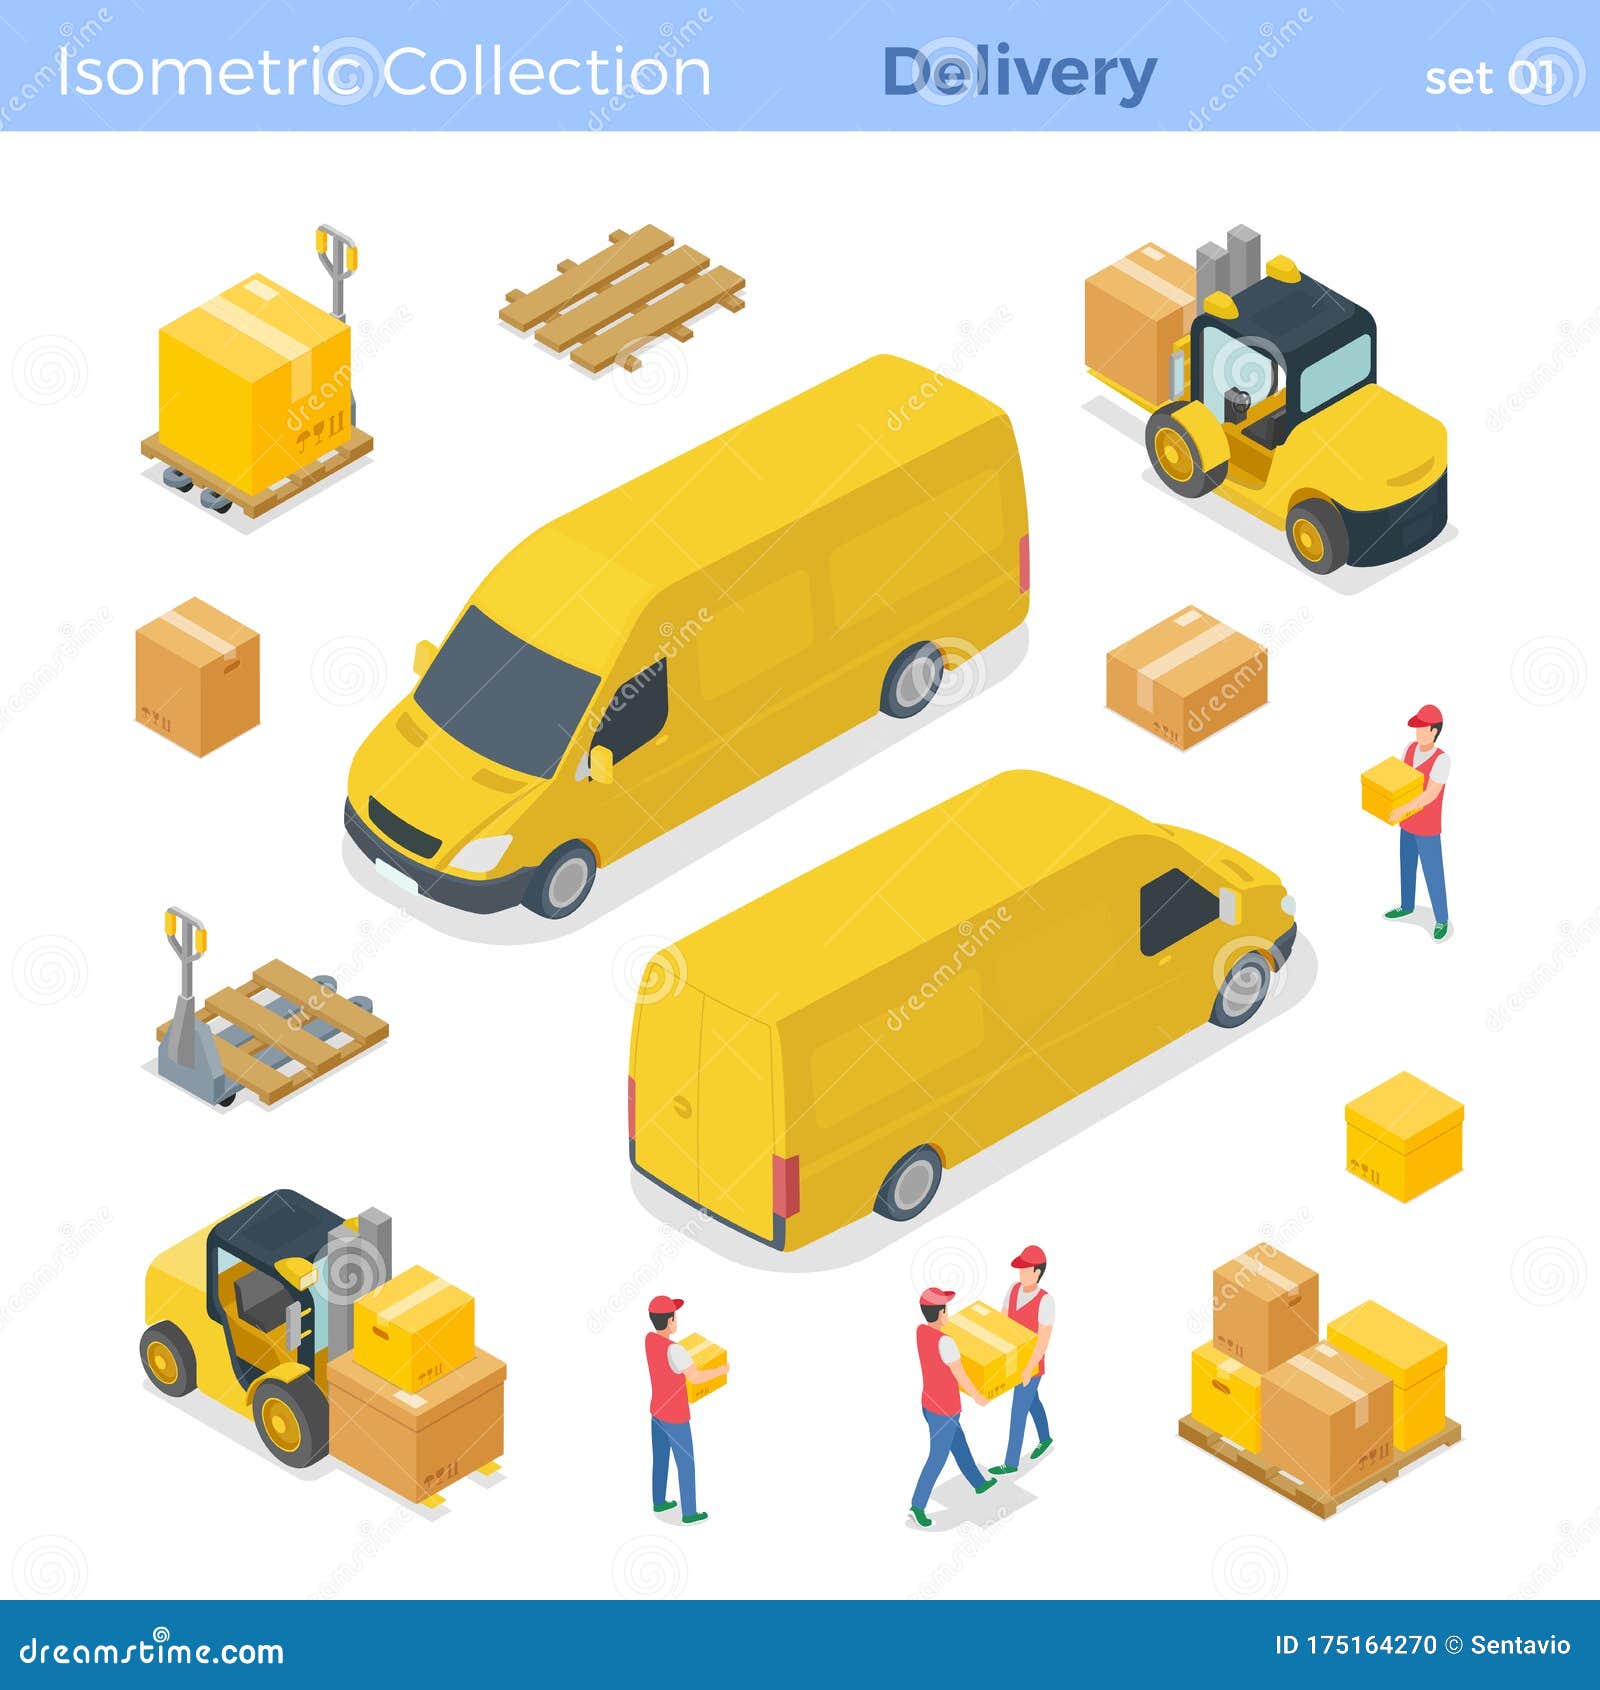 deliver service van truck warehouse staff couriers holding parcel forklift loads boxes pallet packages isometric 